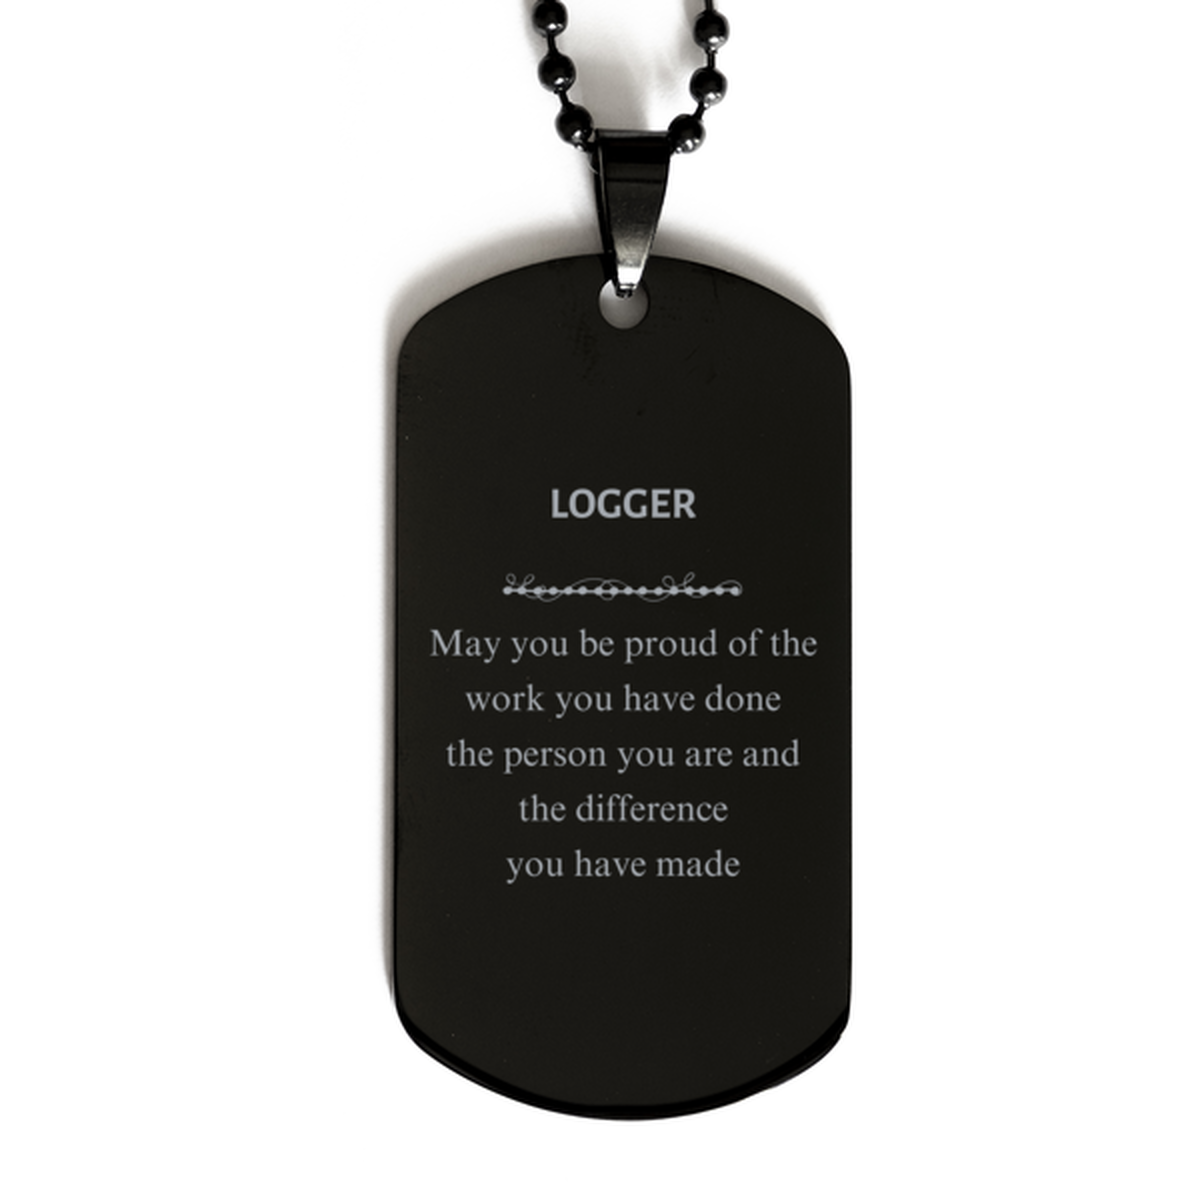 Logger May you be proud of the work you have done, Retirement Logger Black Dog Tag for Colleague Appreciation Gifts Amazing for Logger